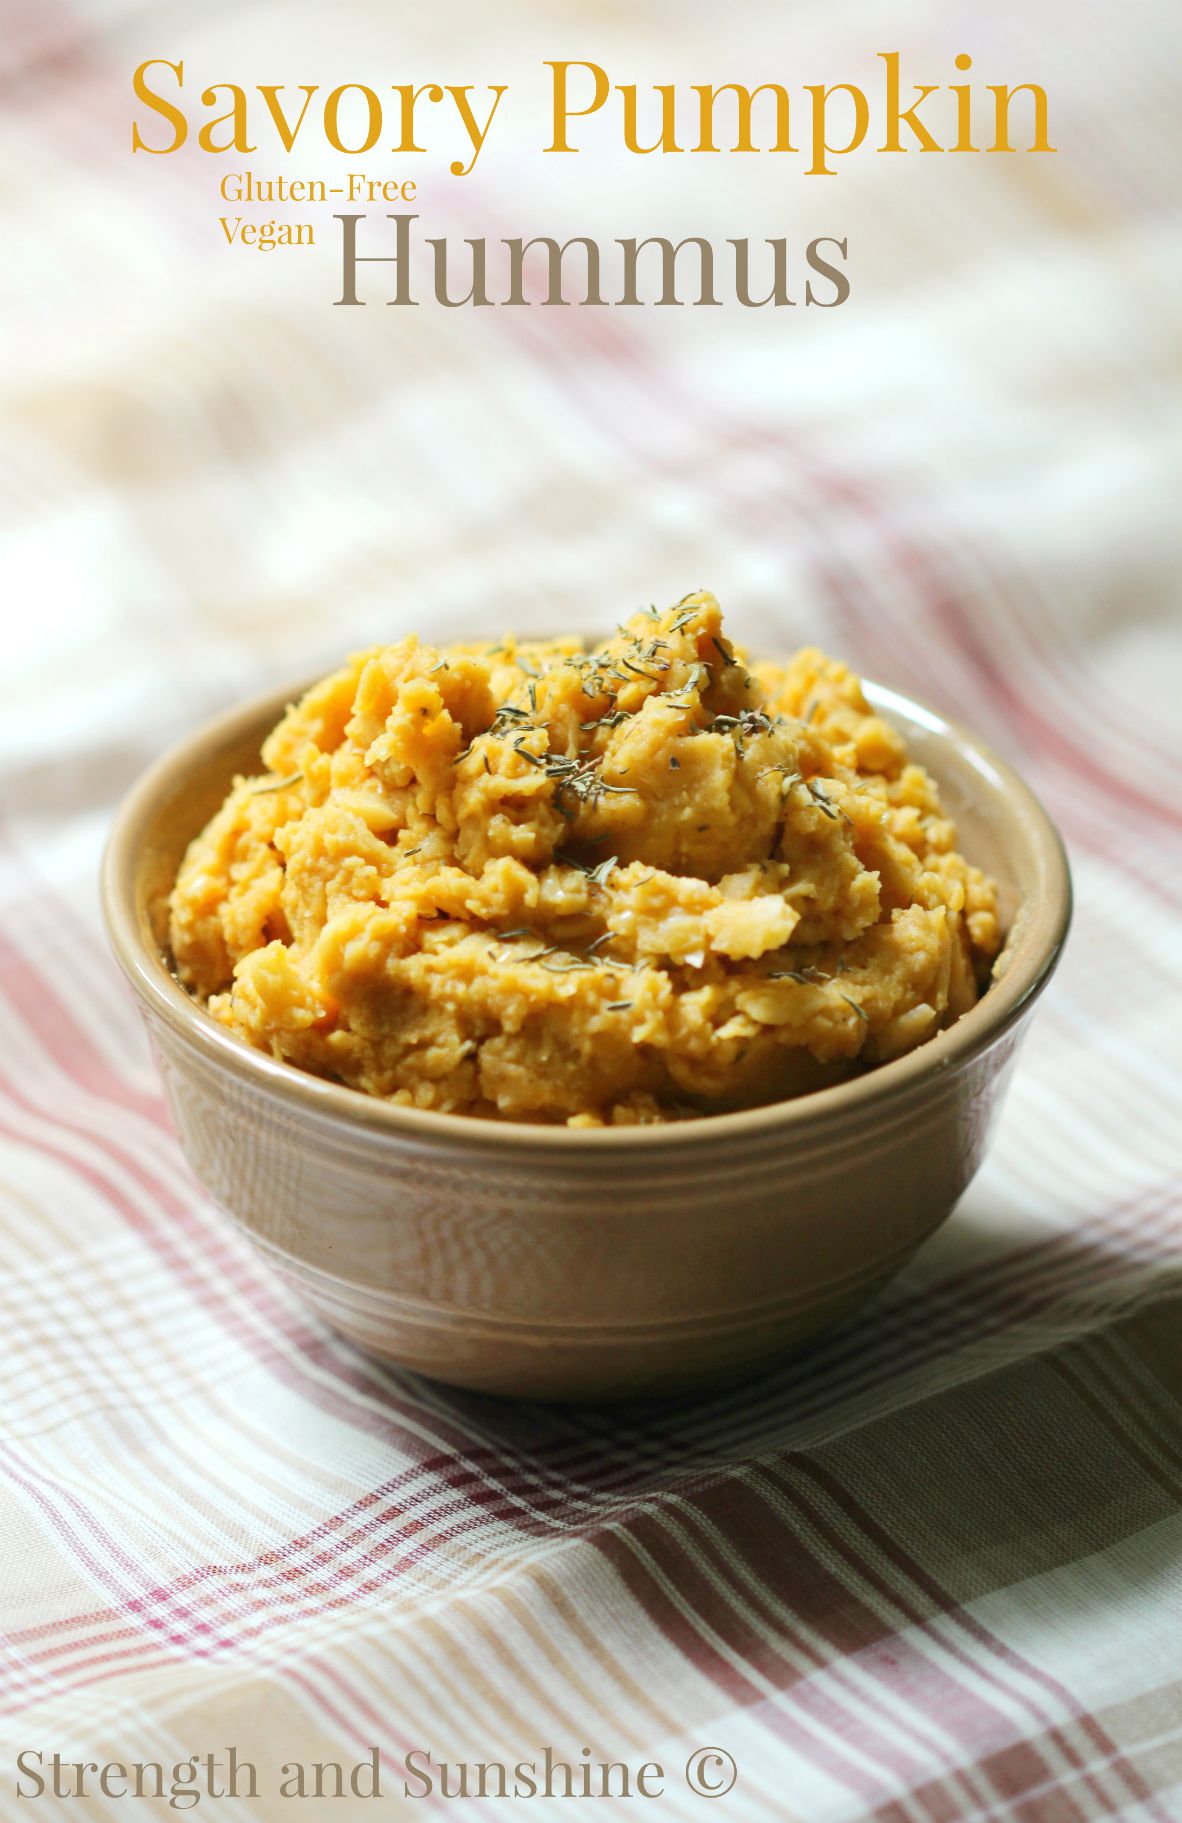 Savory Pumpkin Hummus | Strength and Sunshine @RebeccaGF666 From dipping to scooping, spreading to mixing in, hummus is one versatile food. This gluten-free and vegan savory pumpkin hummus is the perfect flavor for all you fall snacking, cooking, and tailgating!